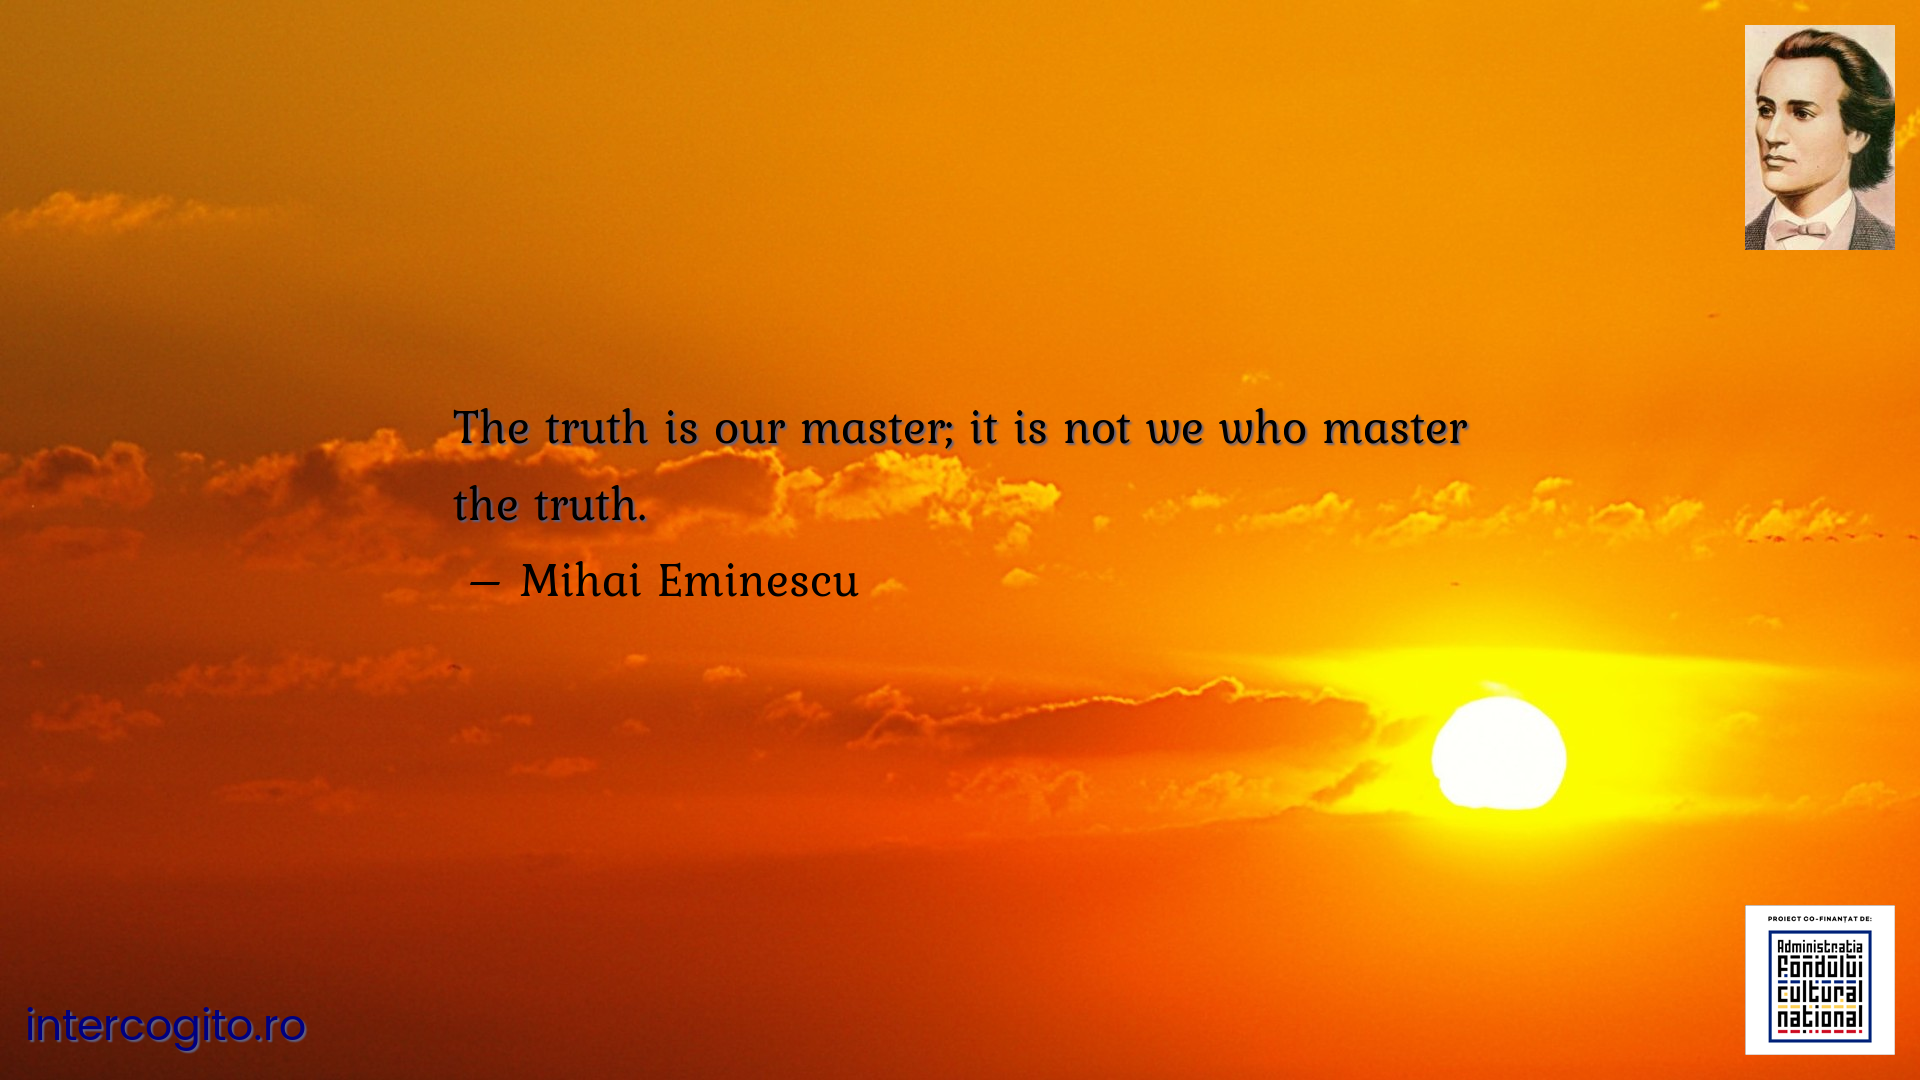 The truth is our master; it is not we who master the truth.